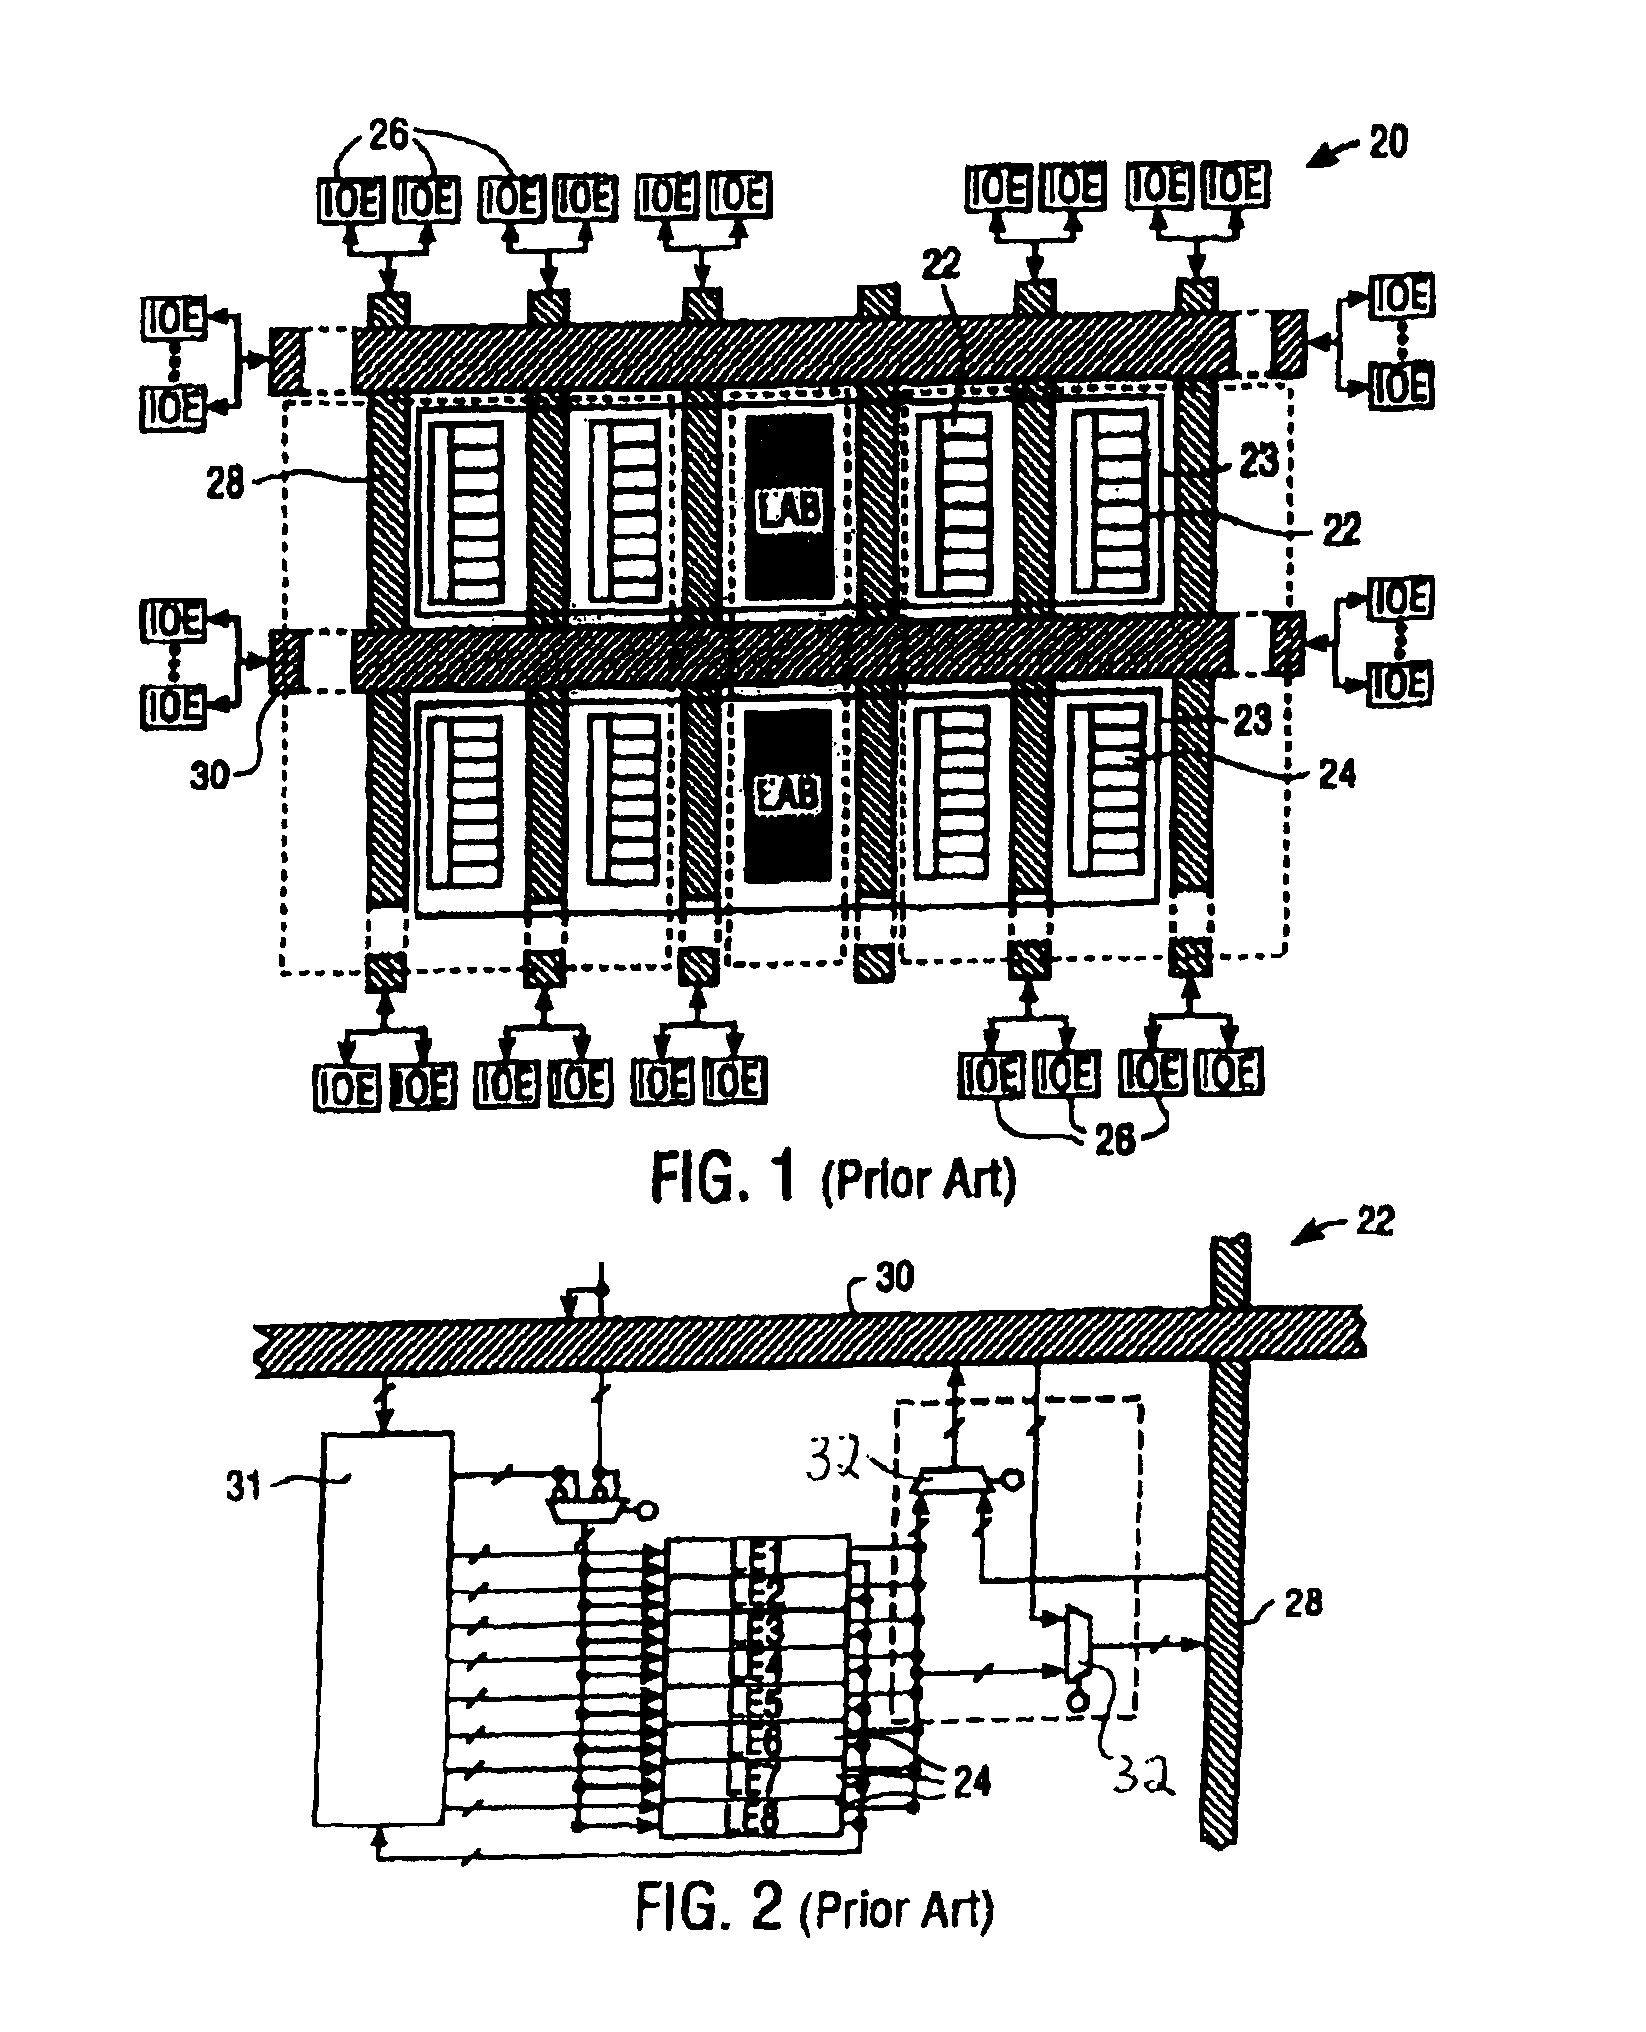 Circuit distribution to multiple integrated circuits